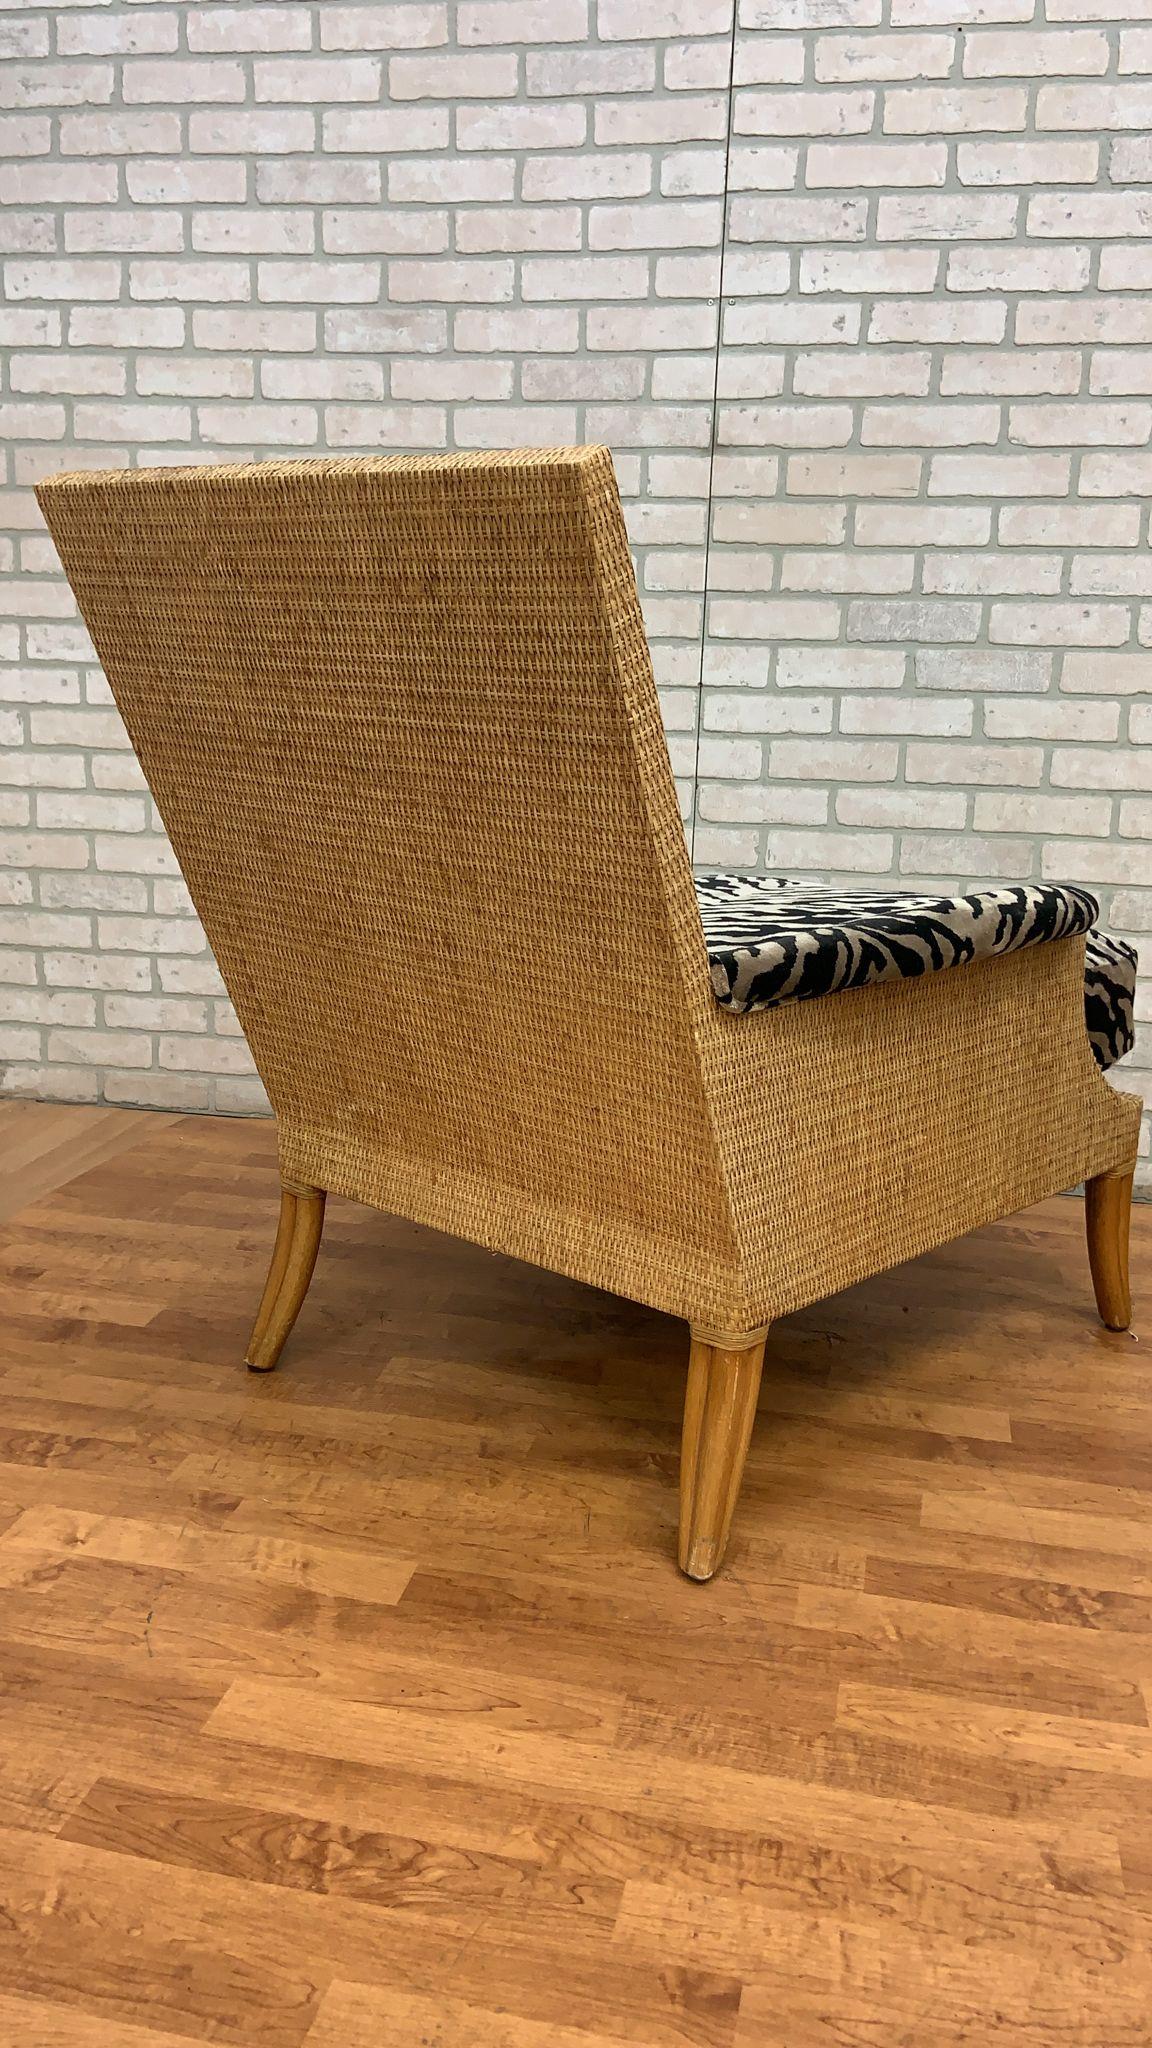 Vintage McGuire Rattan and Wicker Umbria Lounge Chair with Ottoman, 2 Piece Set For Sale 2